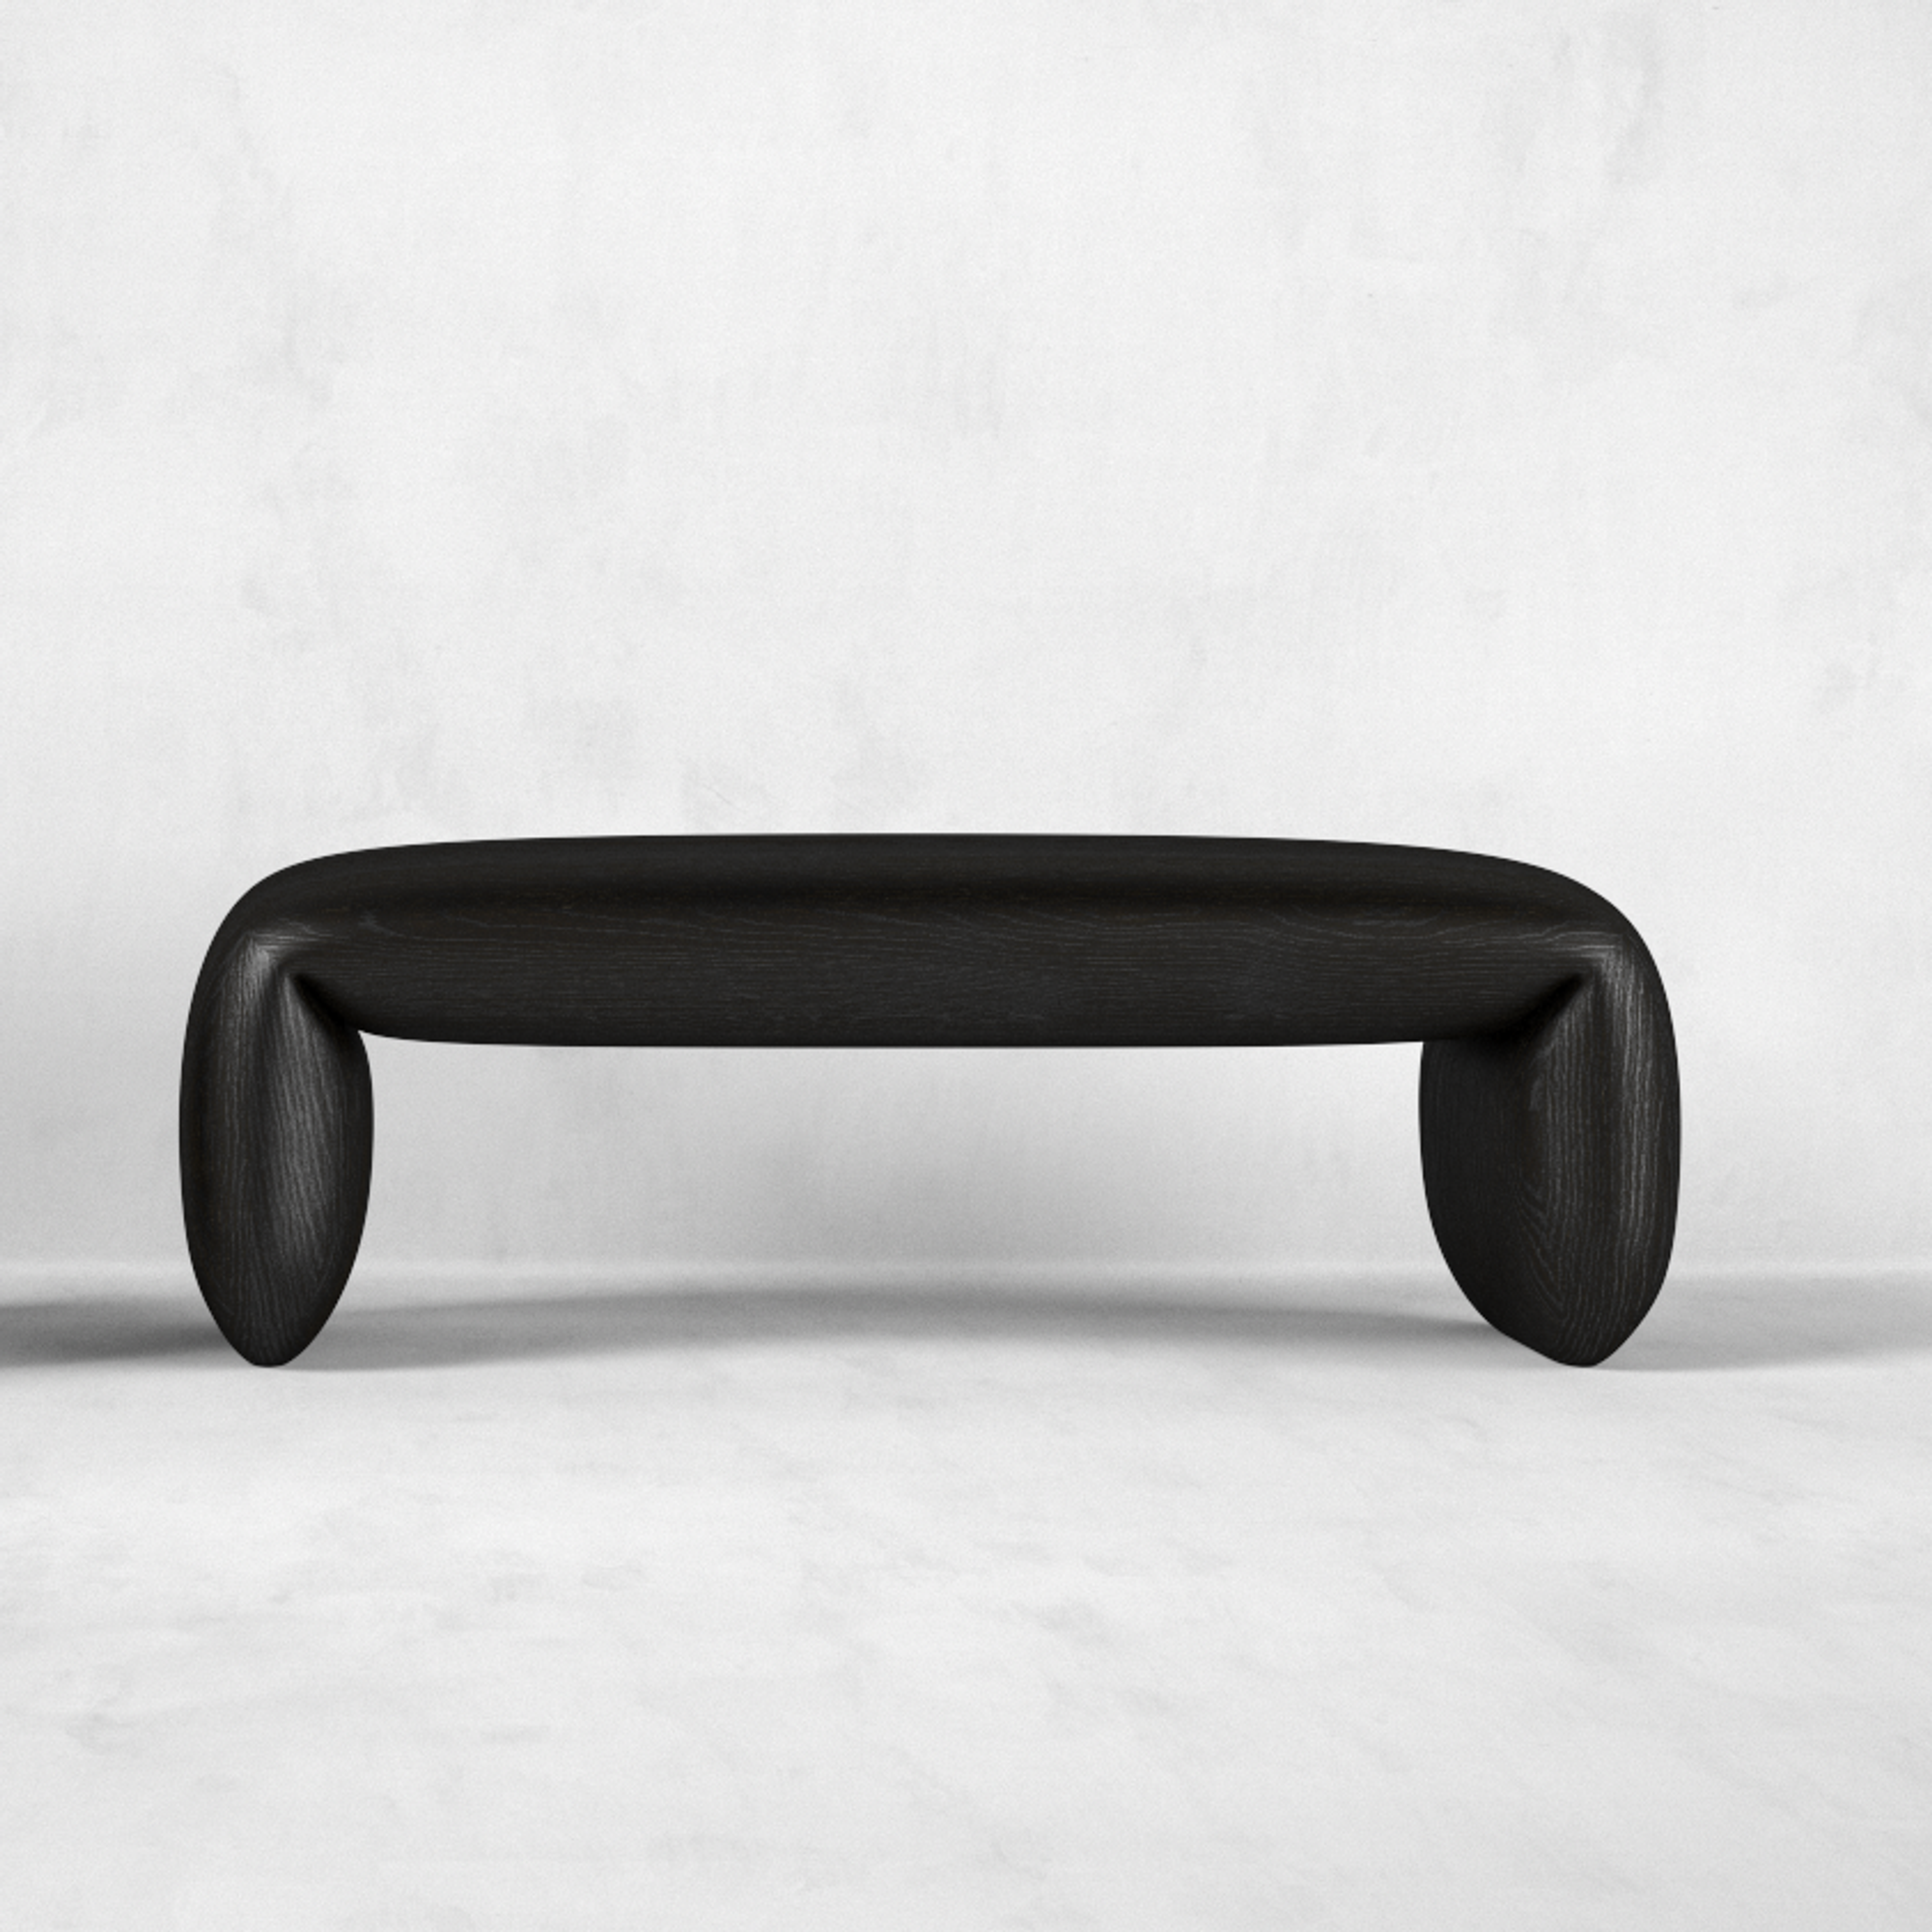 Pieter Maes Ateliers Courbet Fold Bench Furniture Daybeds & Benches